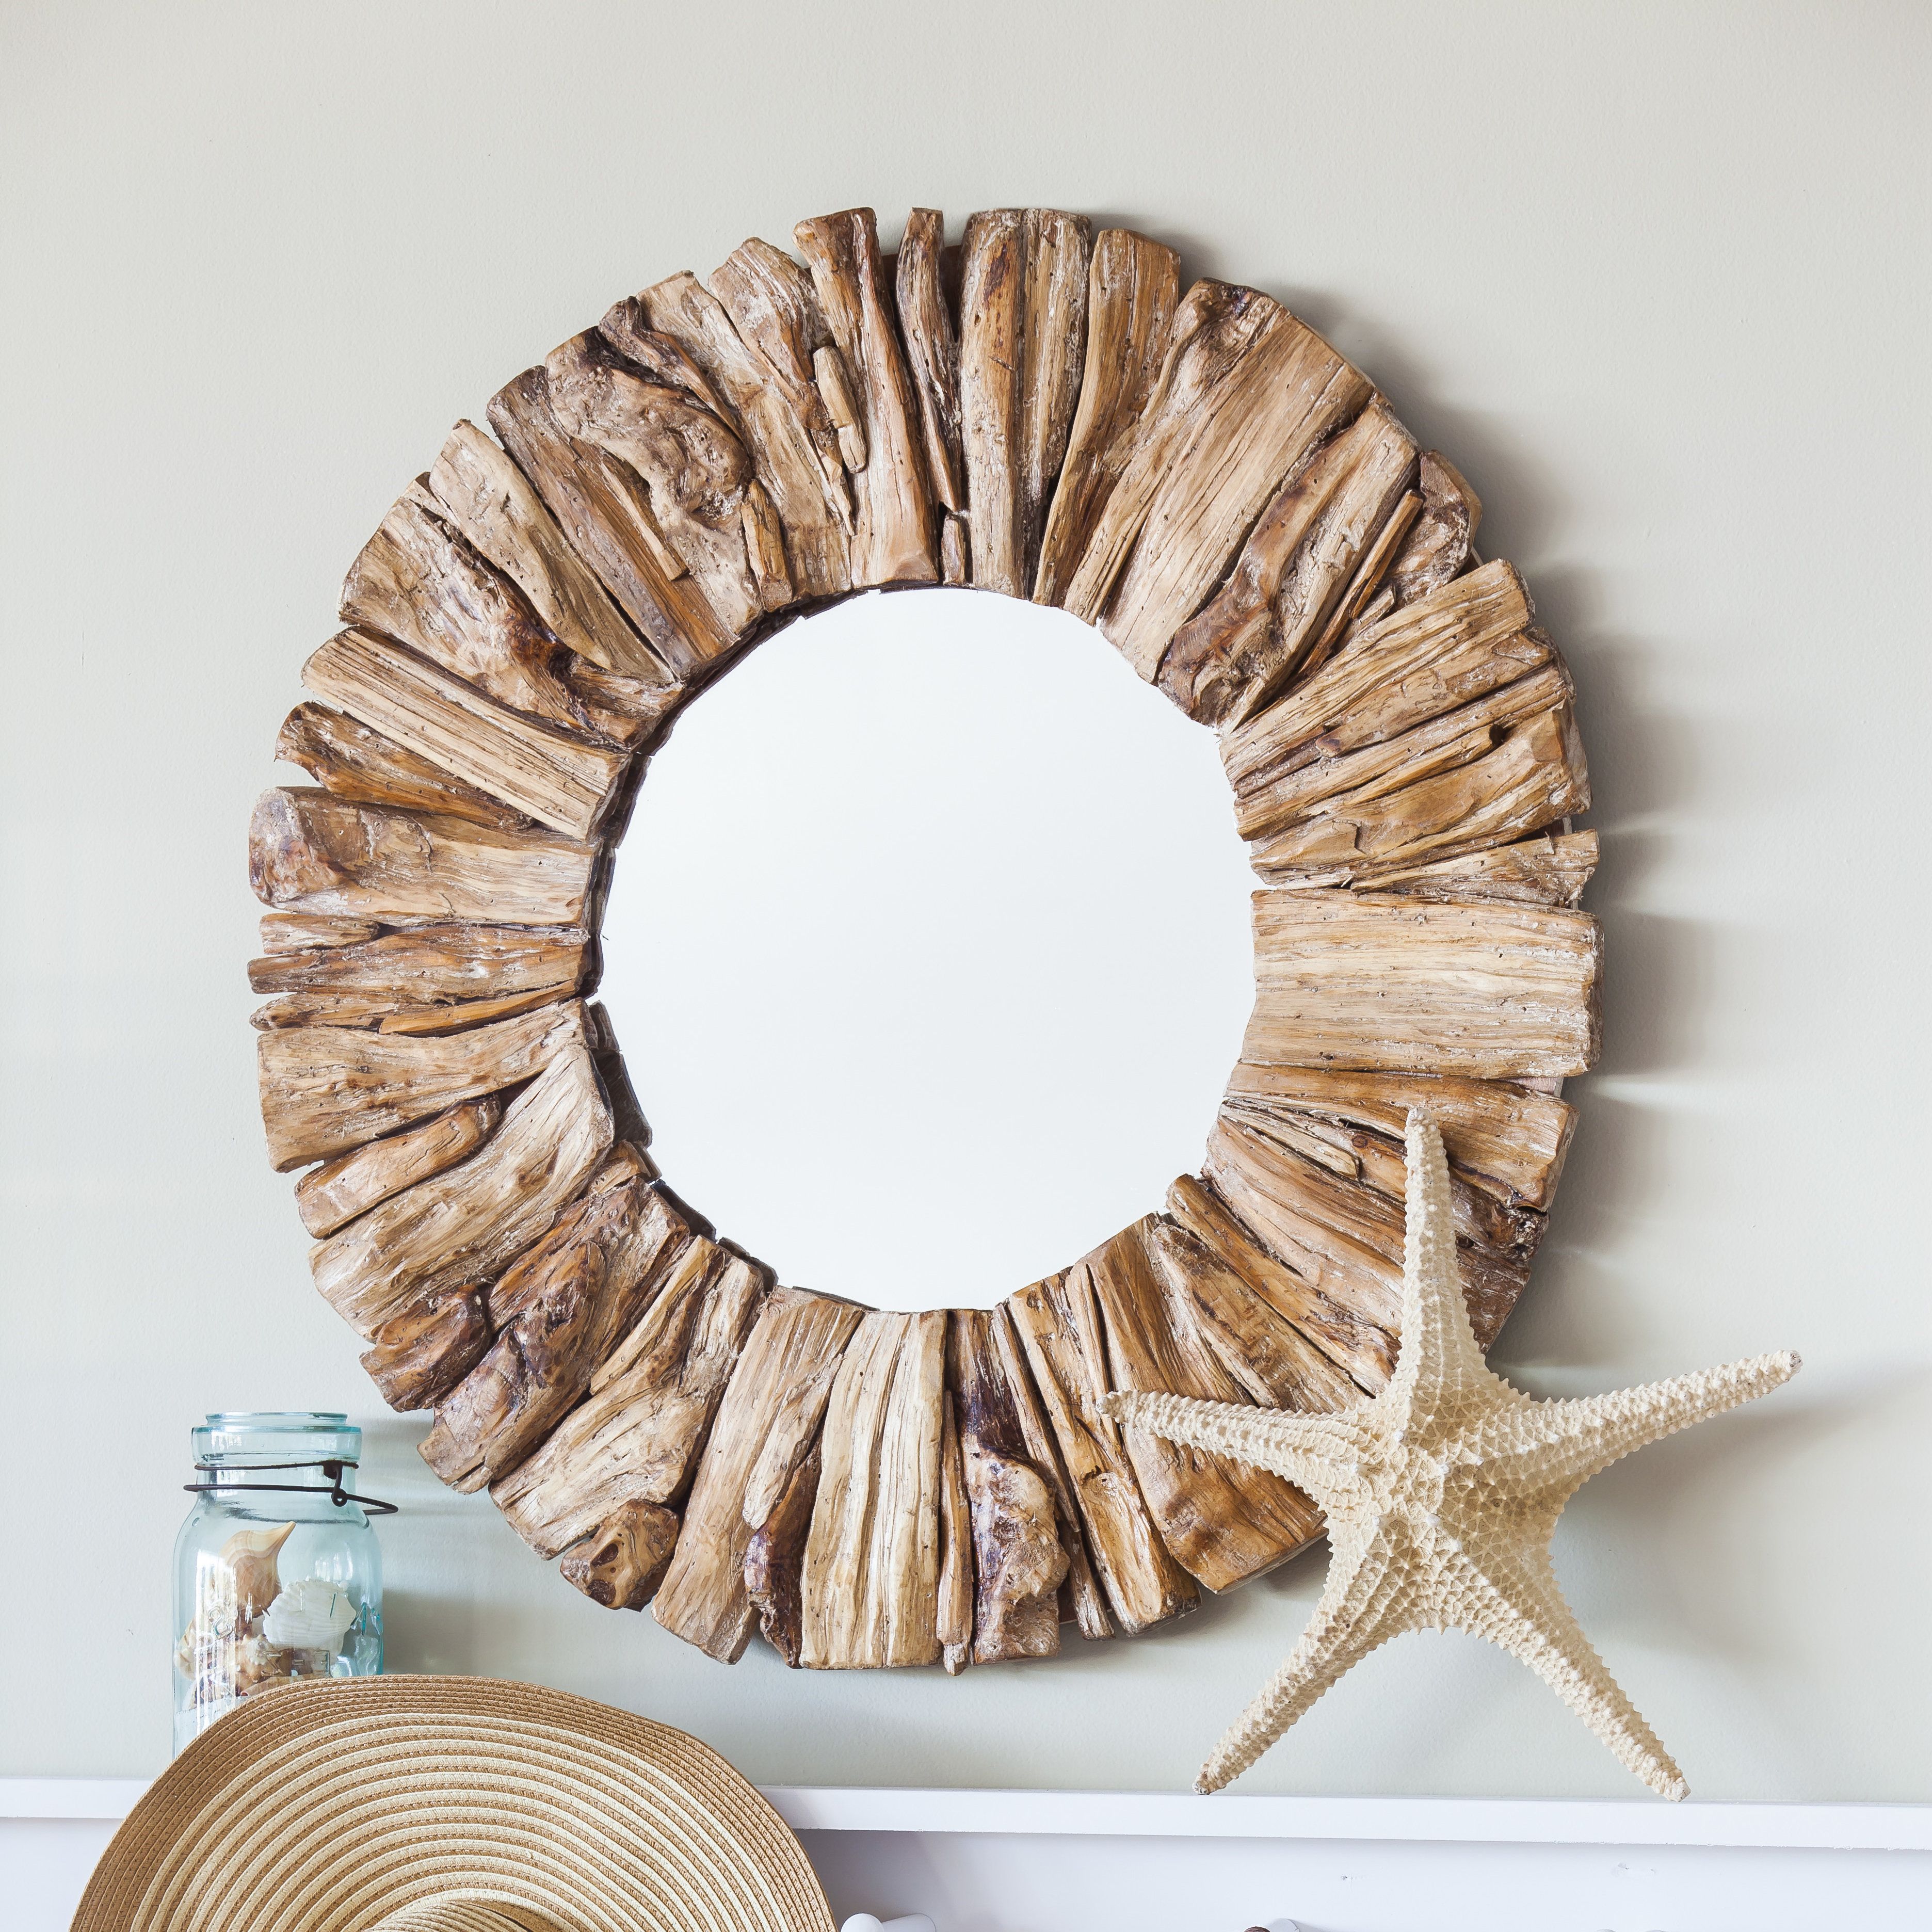 Karn Vertical Round Resin Wall Mirrors With Regard To Latest Anshul Drift Wood Accent Mirror (View 5 of 20)